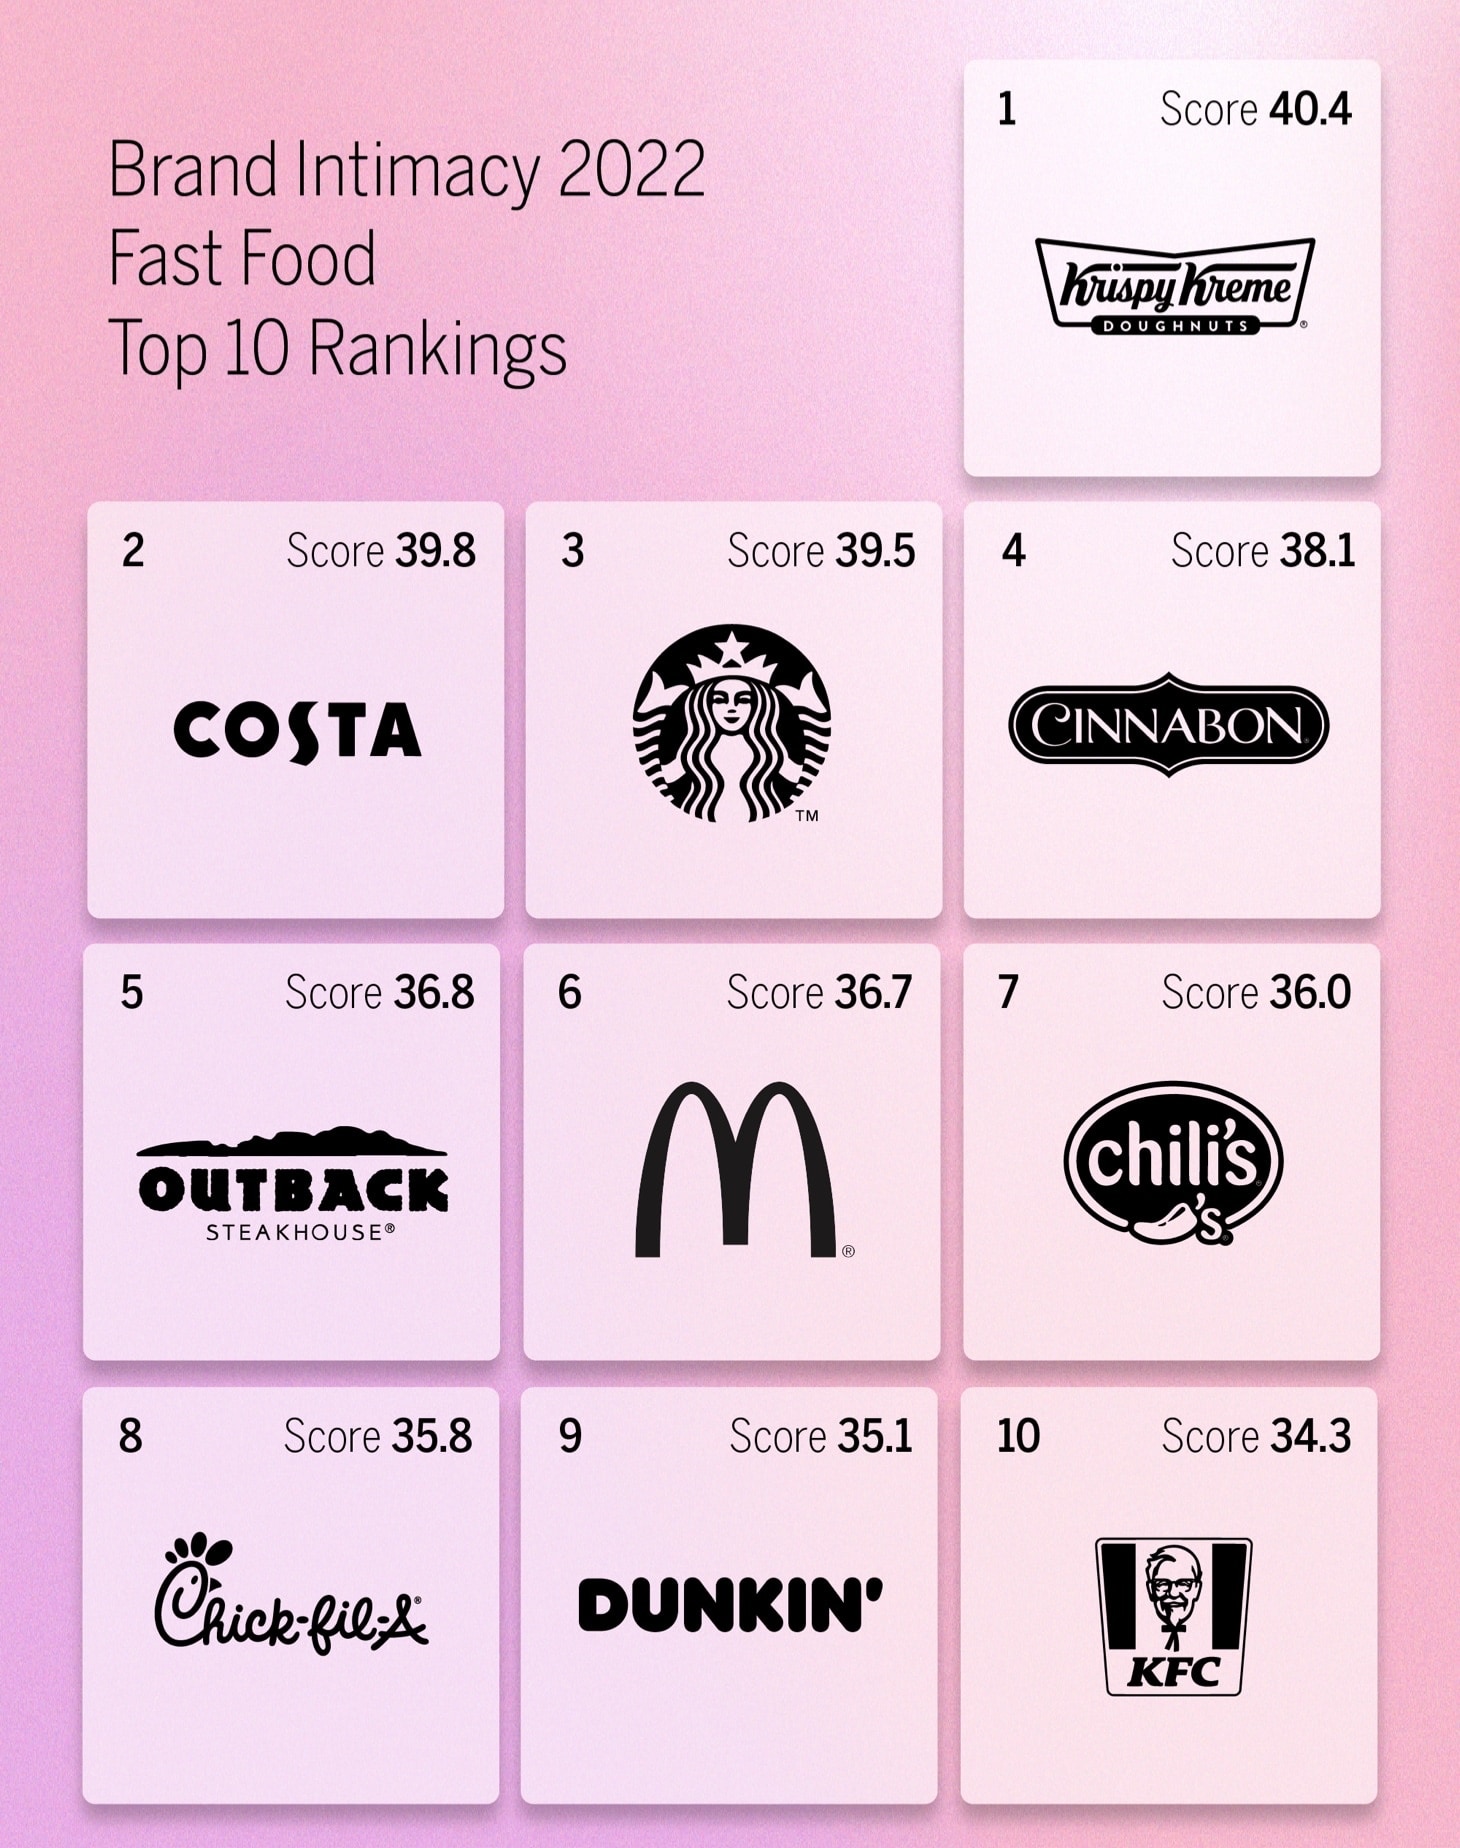 Brand intimacy 2021 top fast food brands.